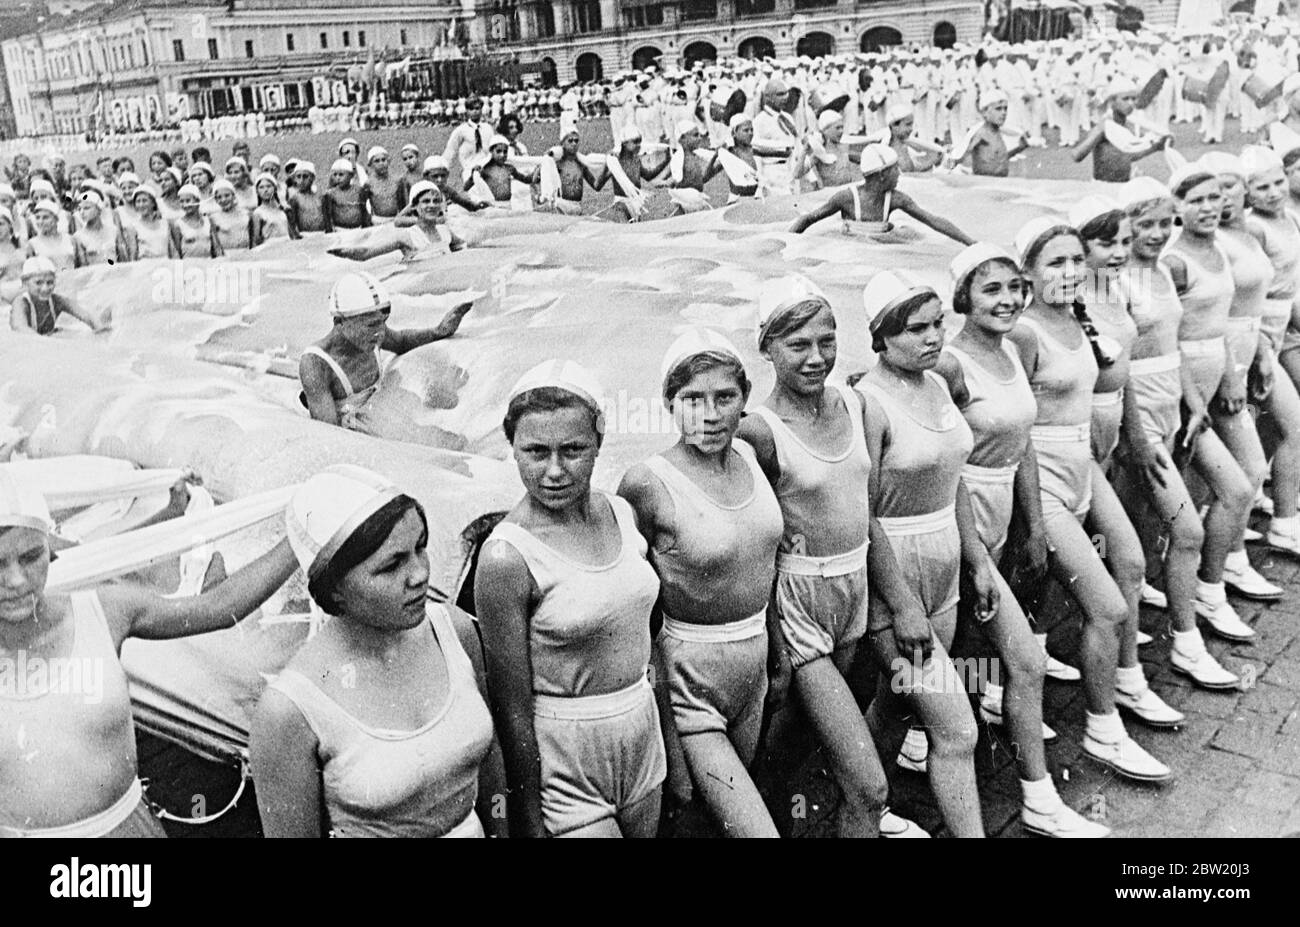 Schoolchildren swimming in a clever representation of a swimming pool which was carried across red Square where joining them 40,000 athletes from the 11 republics which constitute the Soviet Union paraded triumphantly across red Square Moscow, to celebrate the 20th anniversary of the revolution and their coming into operation of the new Stalin Constitution. Included in the parade were representatives of all kinds of sport ranging from d gymnastics to huntsman with Eagles. 15 July 1937[?] Stock Photo